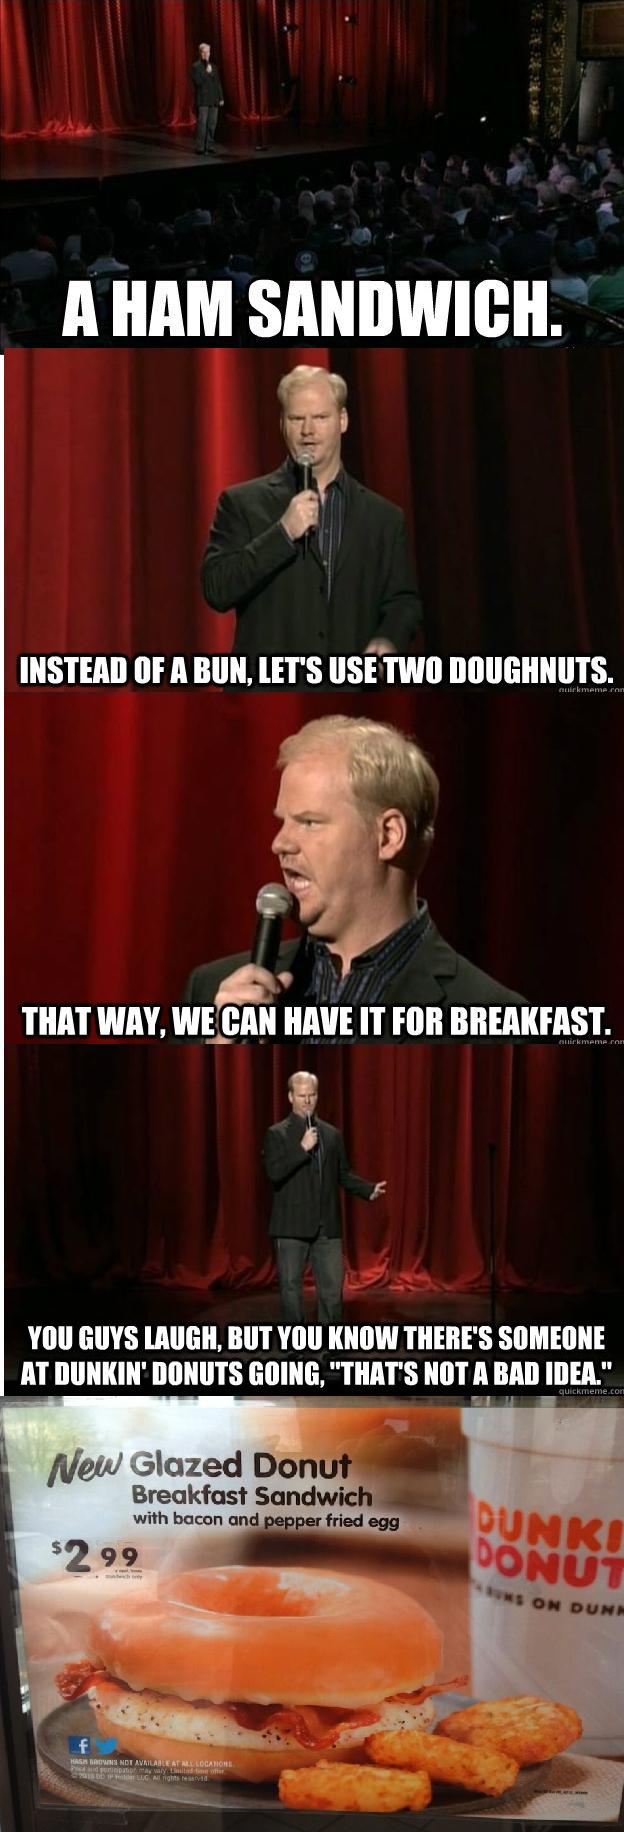 Jim Gaffigan near perfectly predicts the future of food.